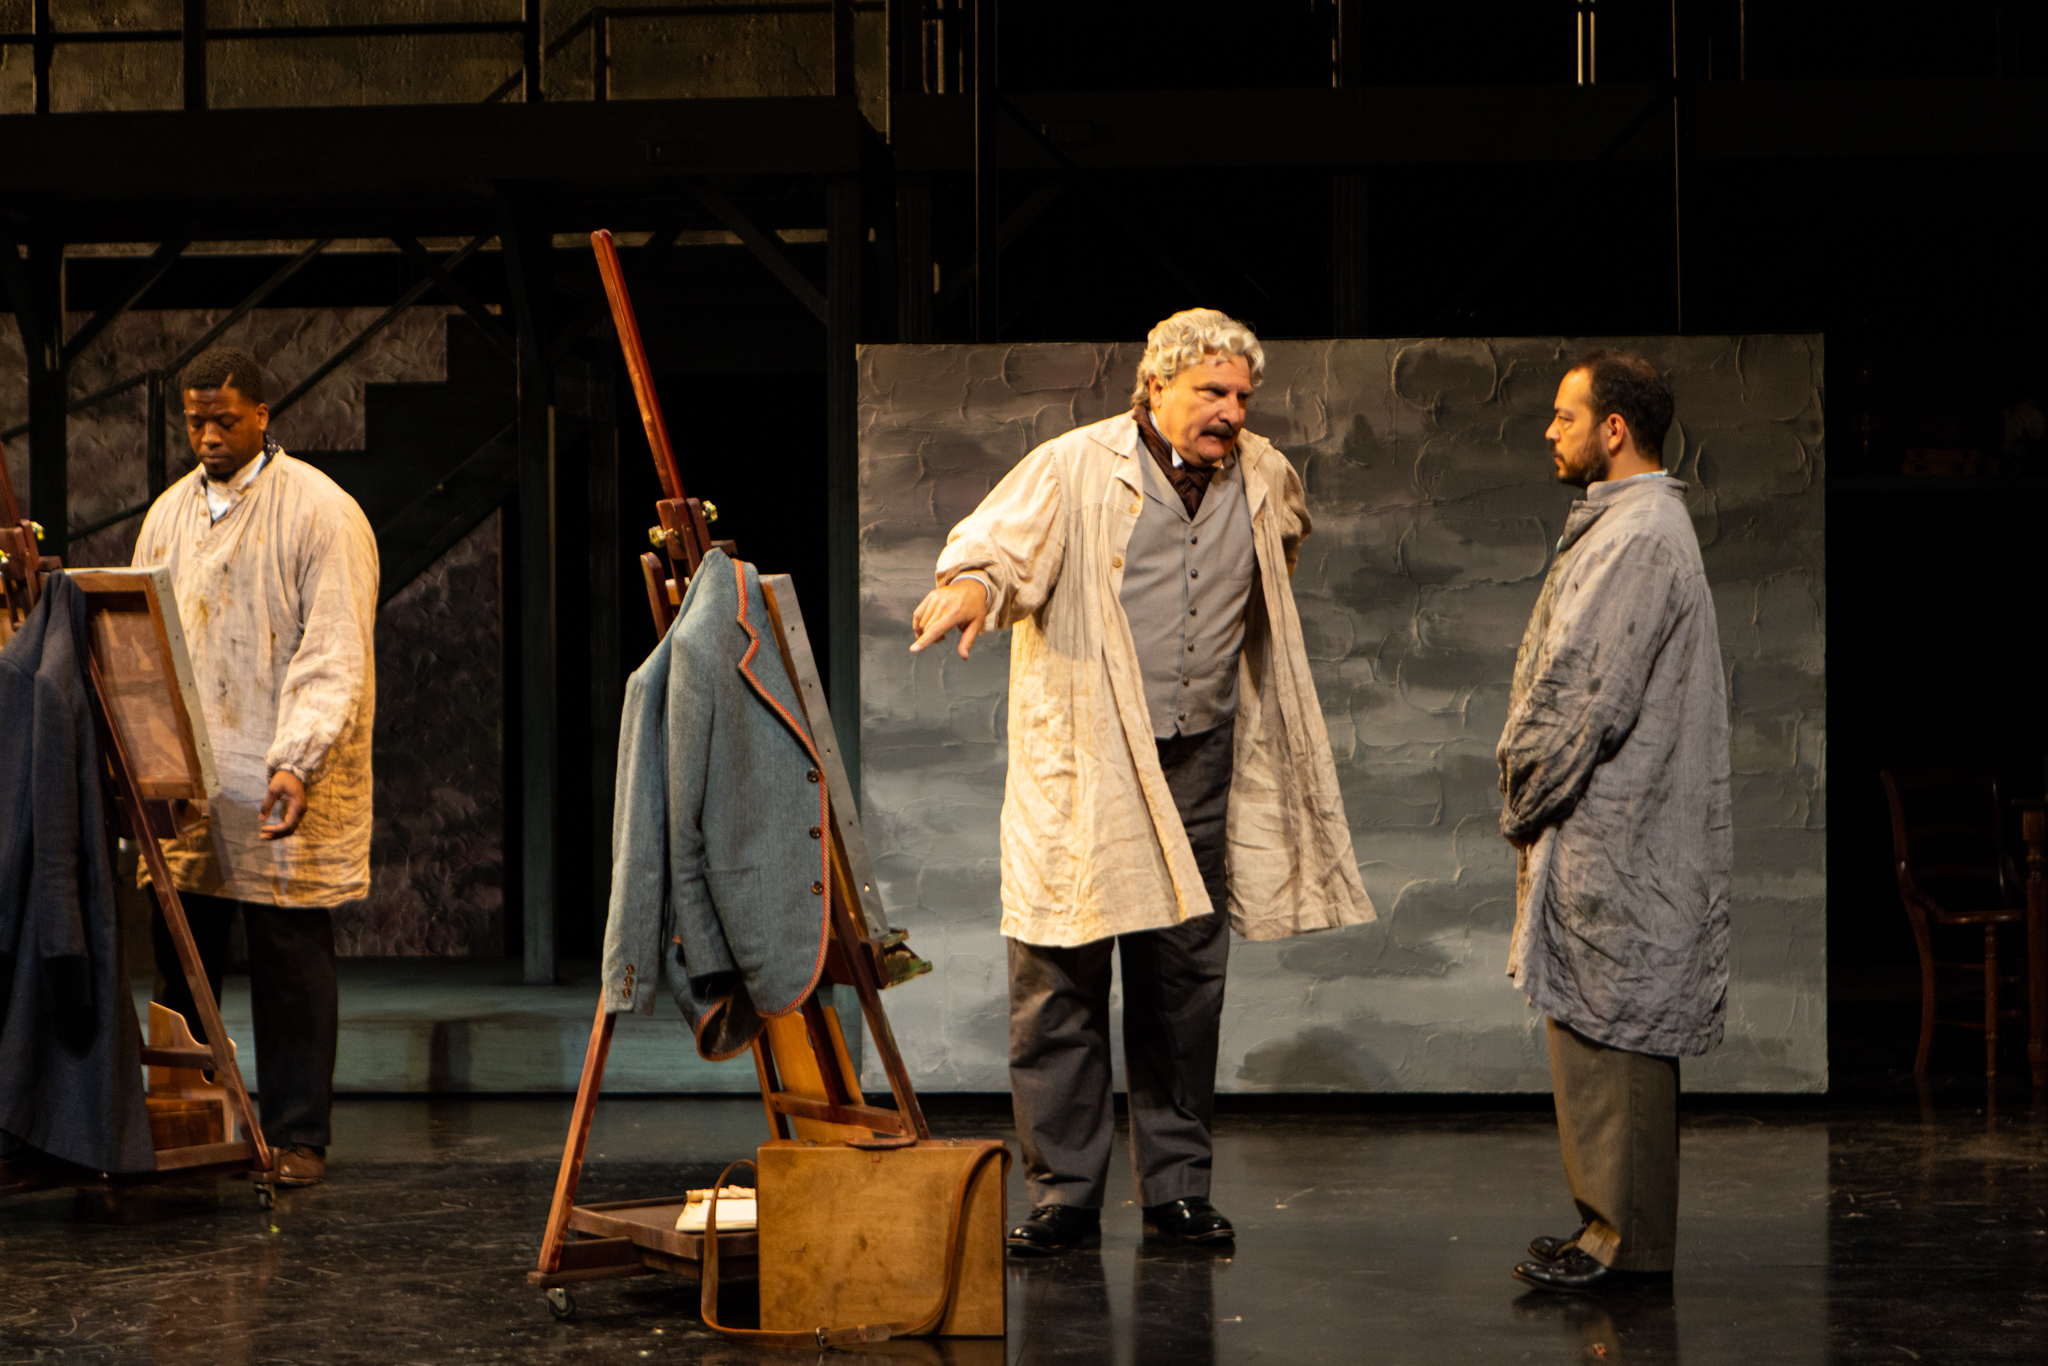 L-R: DeLeon Dallas as “Bernard,” Marco Barricelli as “Cormon” and Paco Tolson as “Vincent” in La Jolla Playhouse’s world-premiere production of TO THE YELLOW HOUSE, by Kimber Lee, directed by Neel Keller; photo by Rich Soublet II.